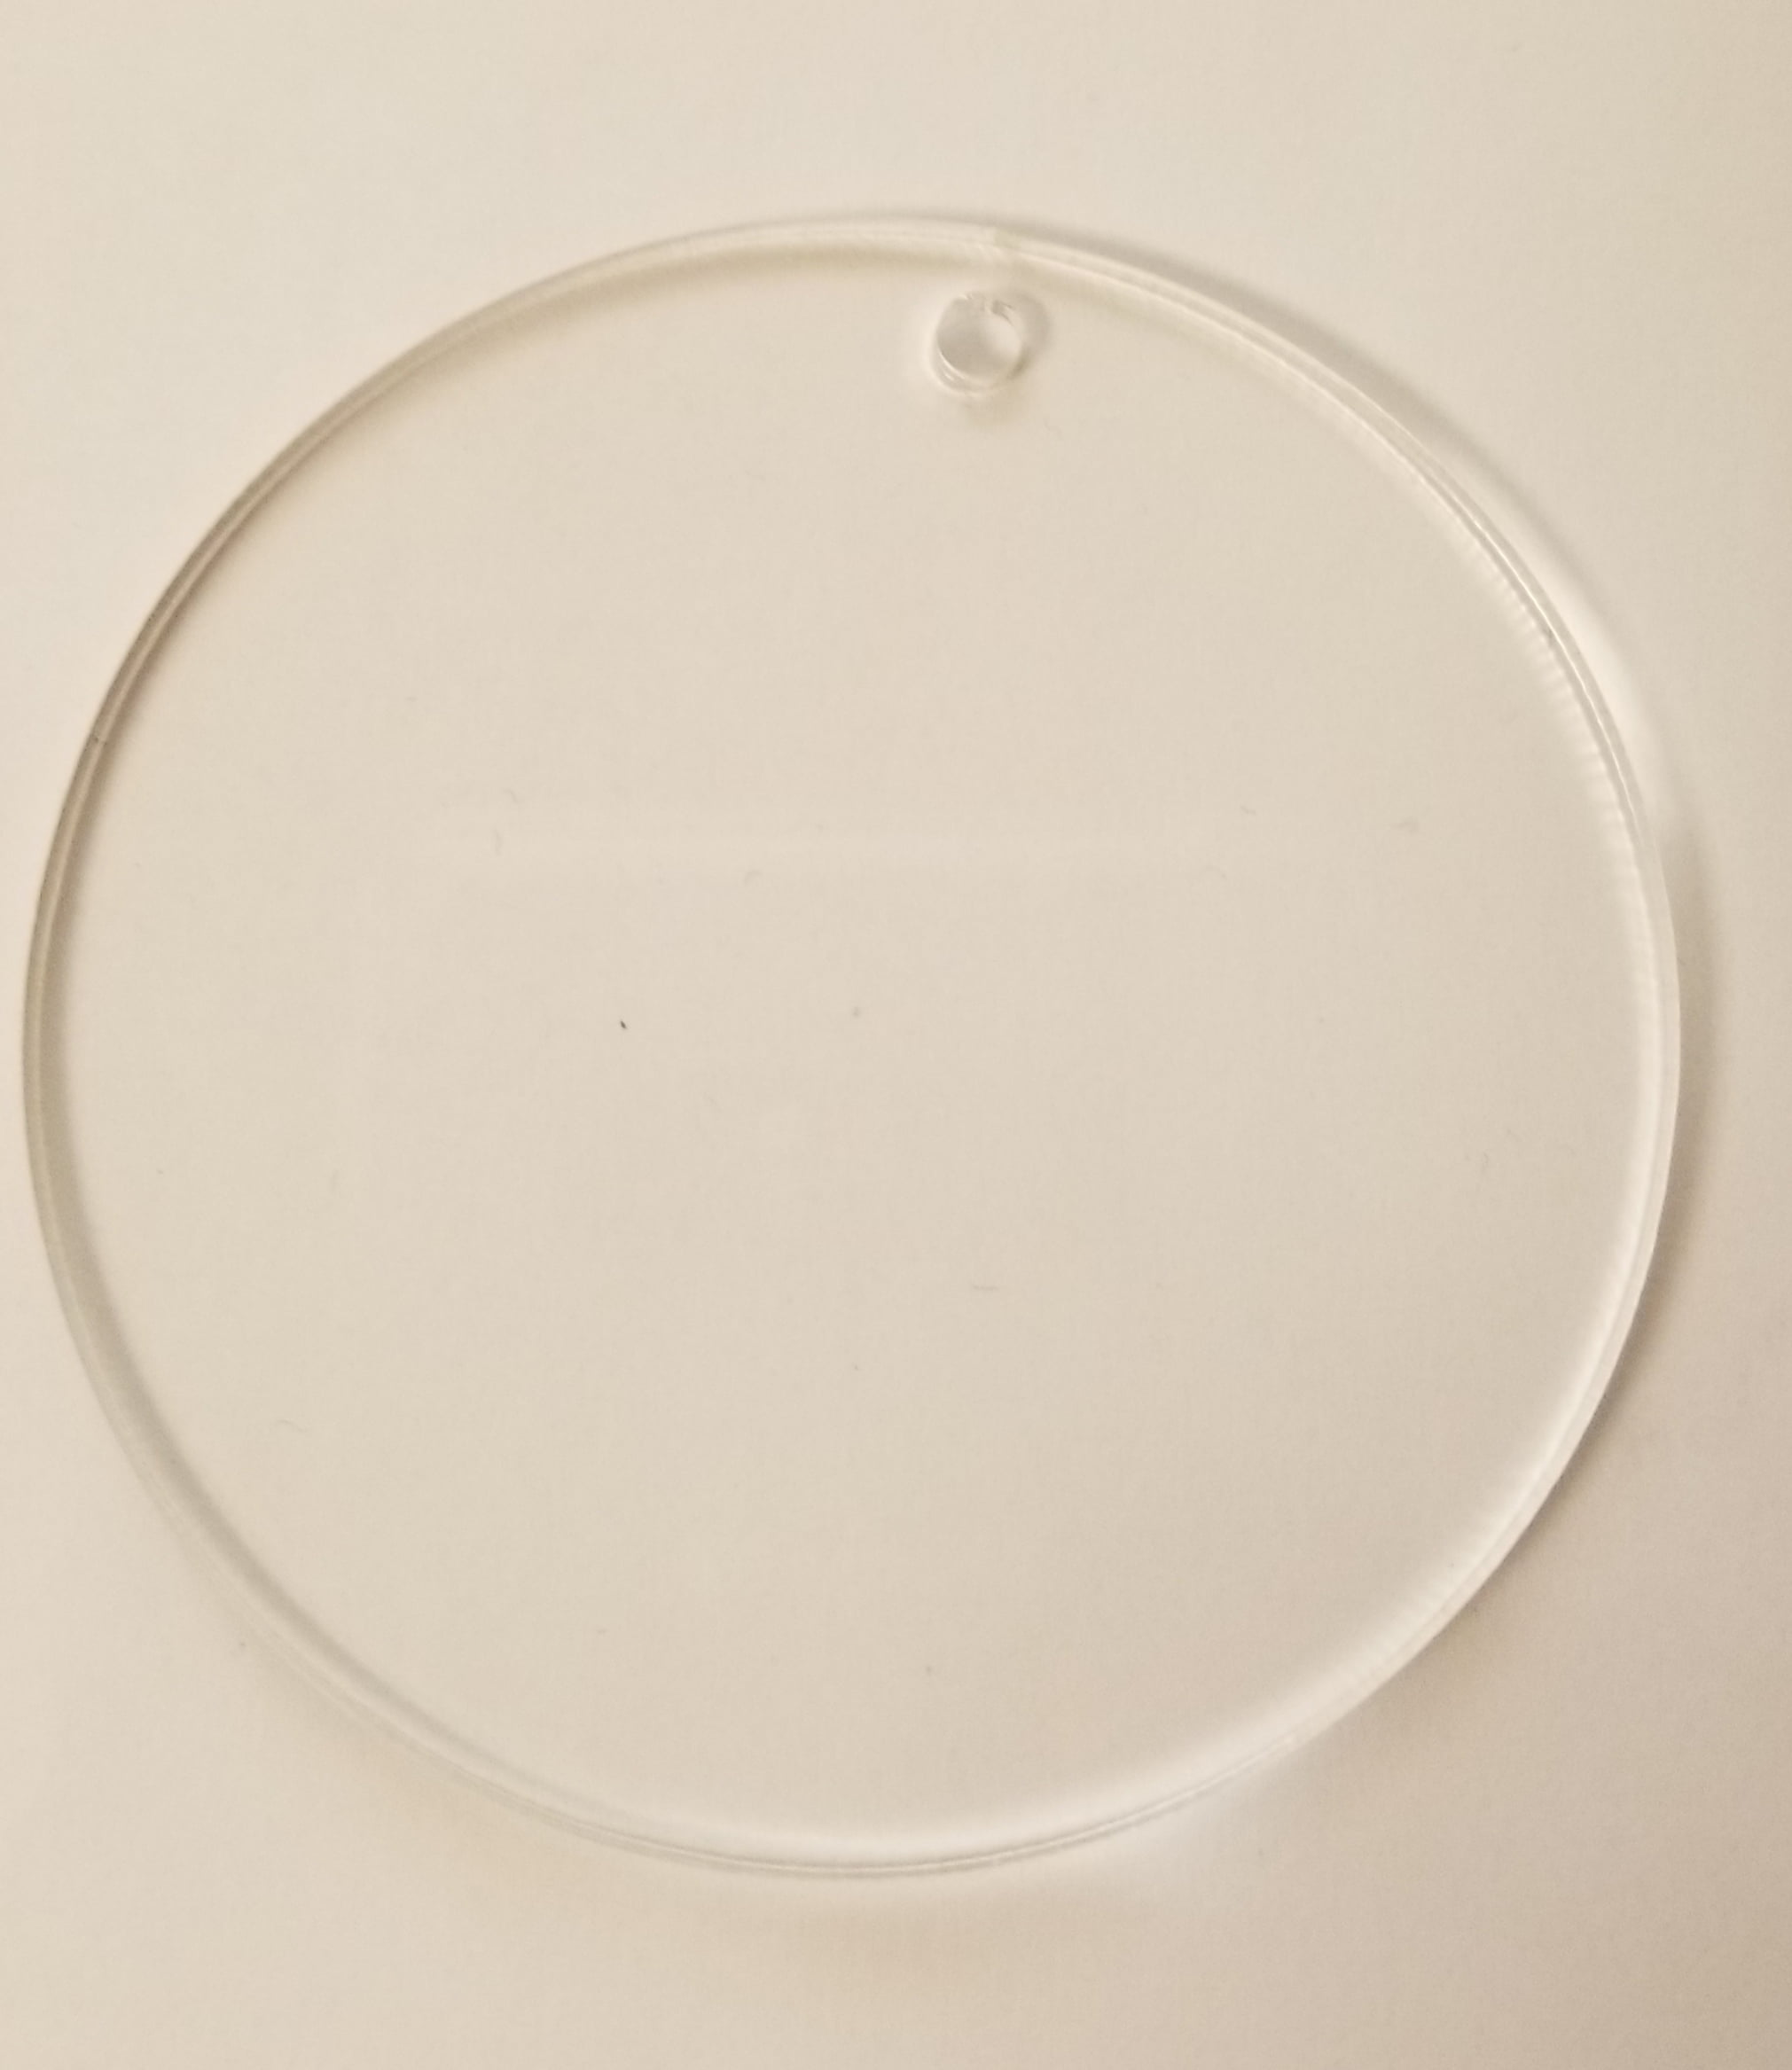  20PCS Transparent Acrylic Round Circle, Clear Plexiglass Round  Disc, Acrylic Round Sheet, Lucite Circle Round Disc 1/8 Thick (Clear, 1)  : Industrial & Scientific